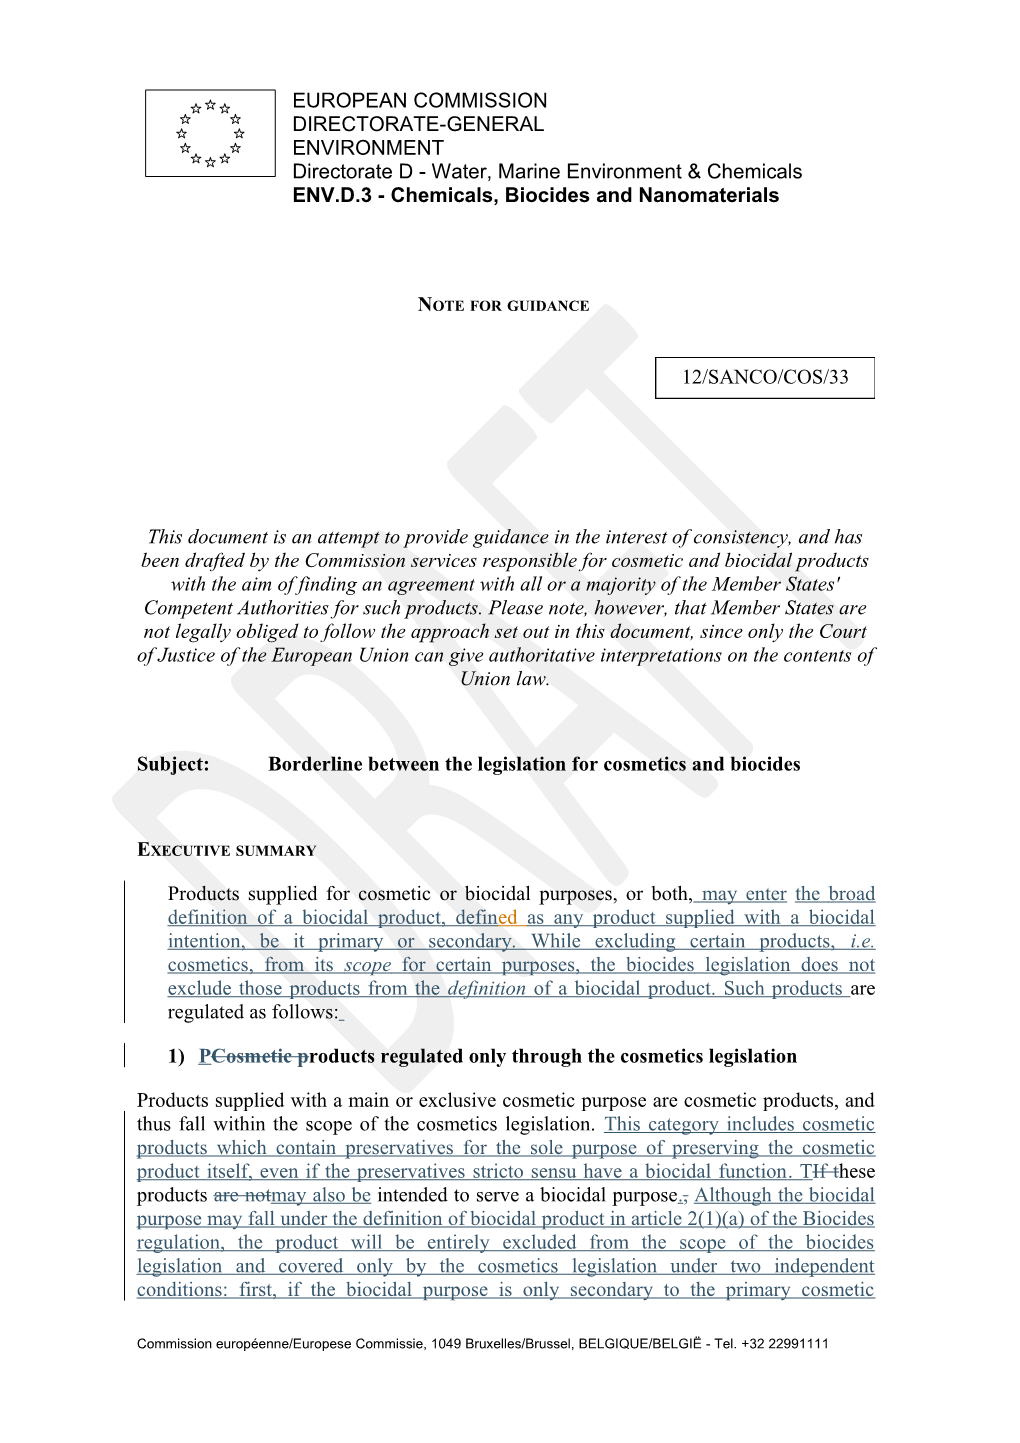 Subject:Borderline Between the Legislation Forcosmetics and Biocides